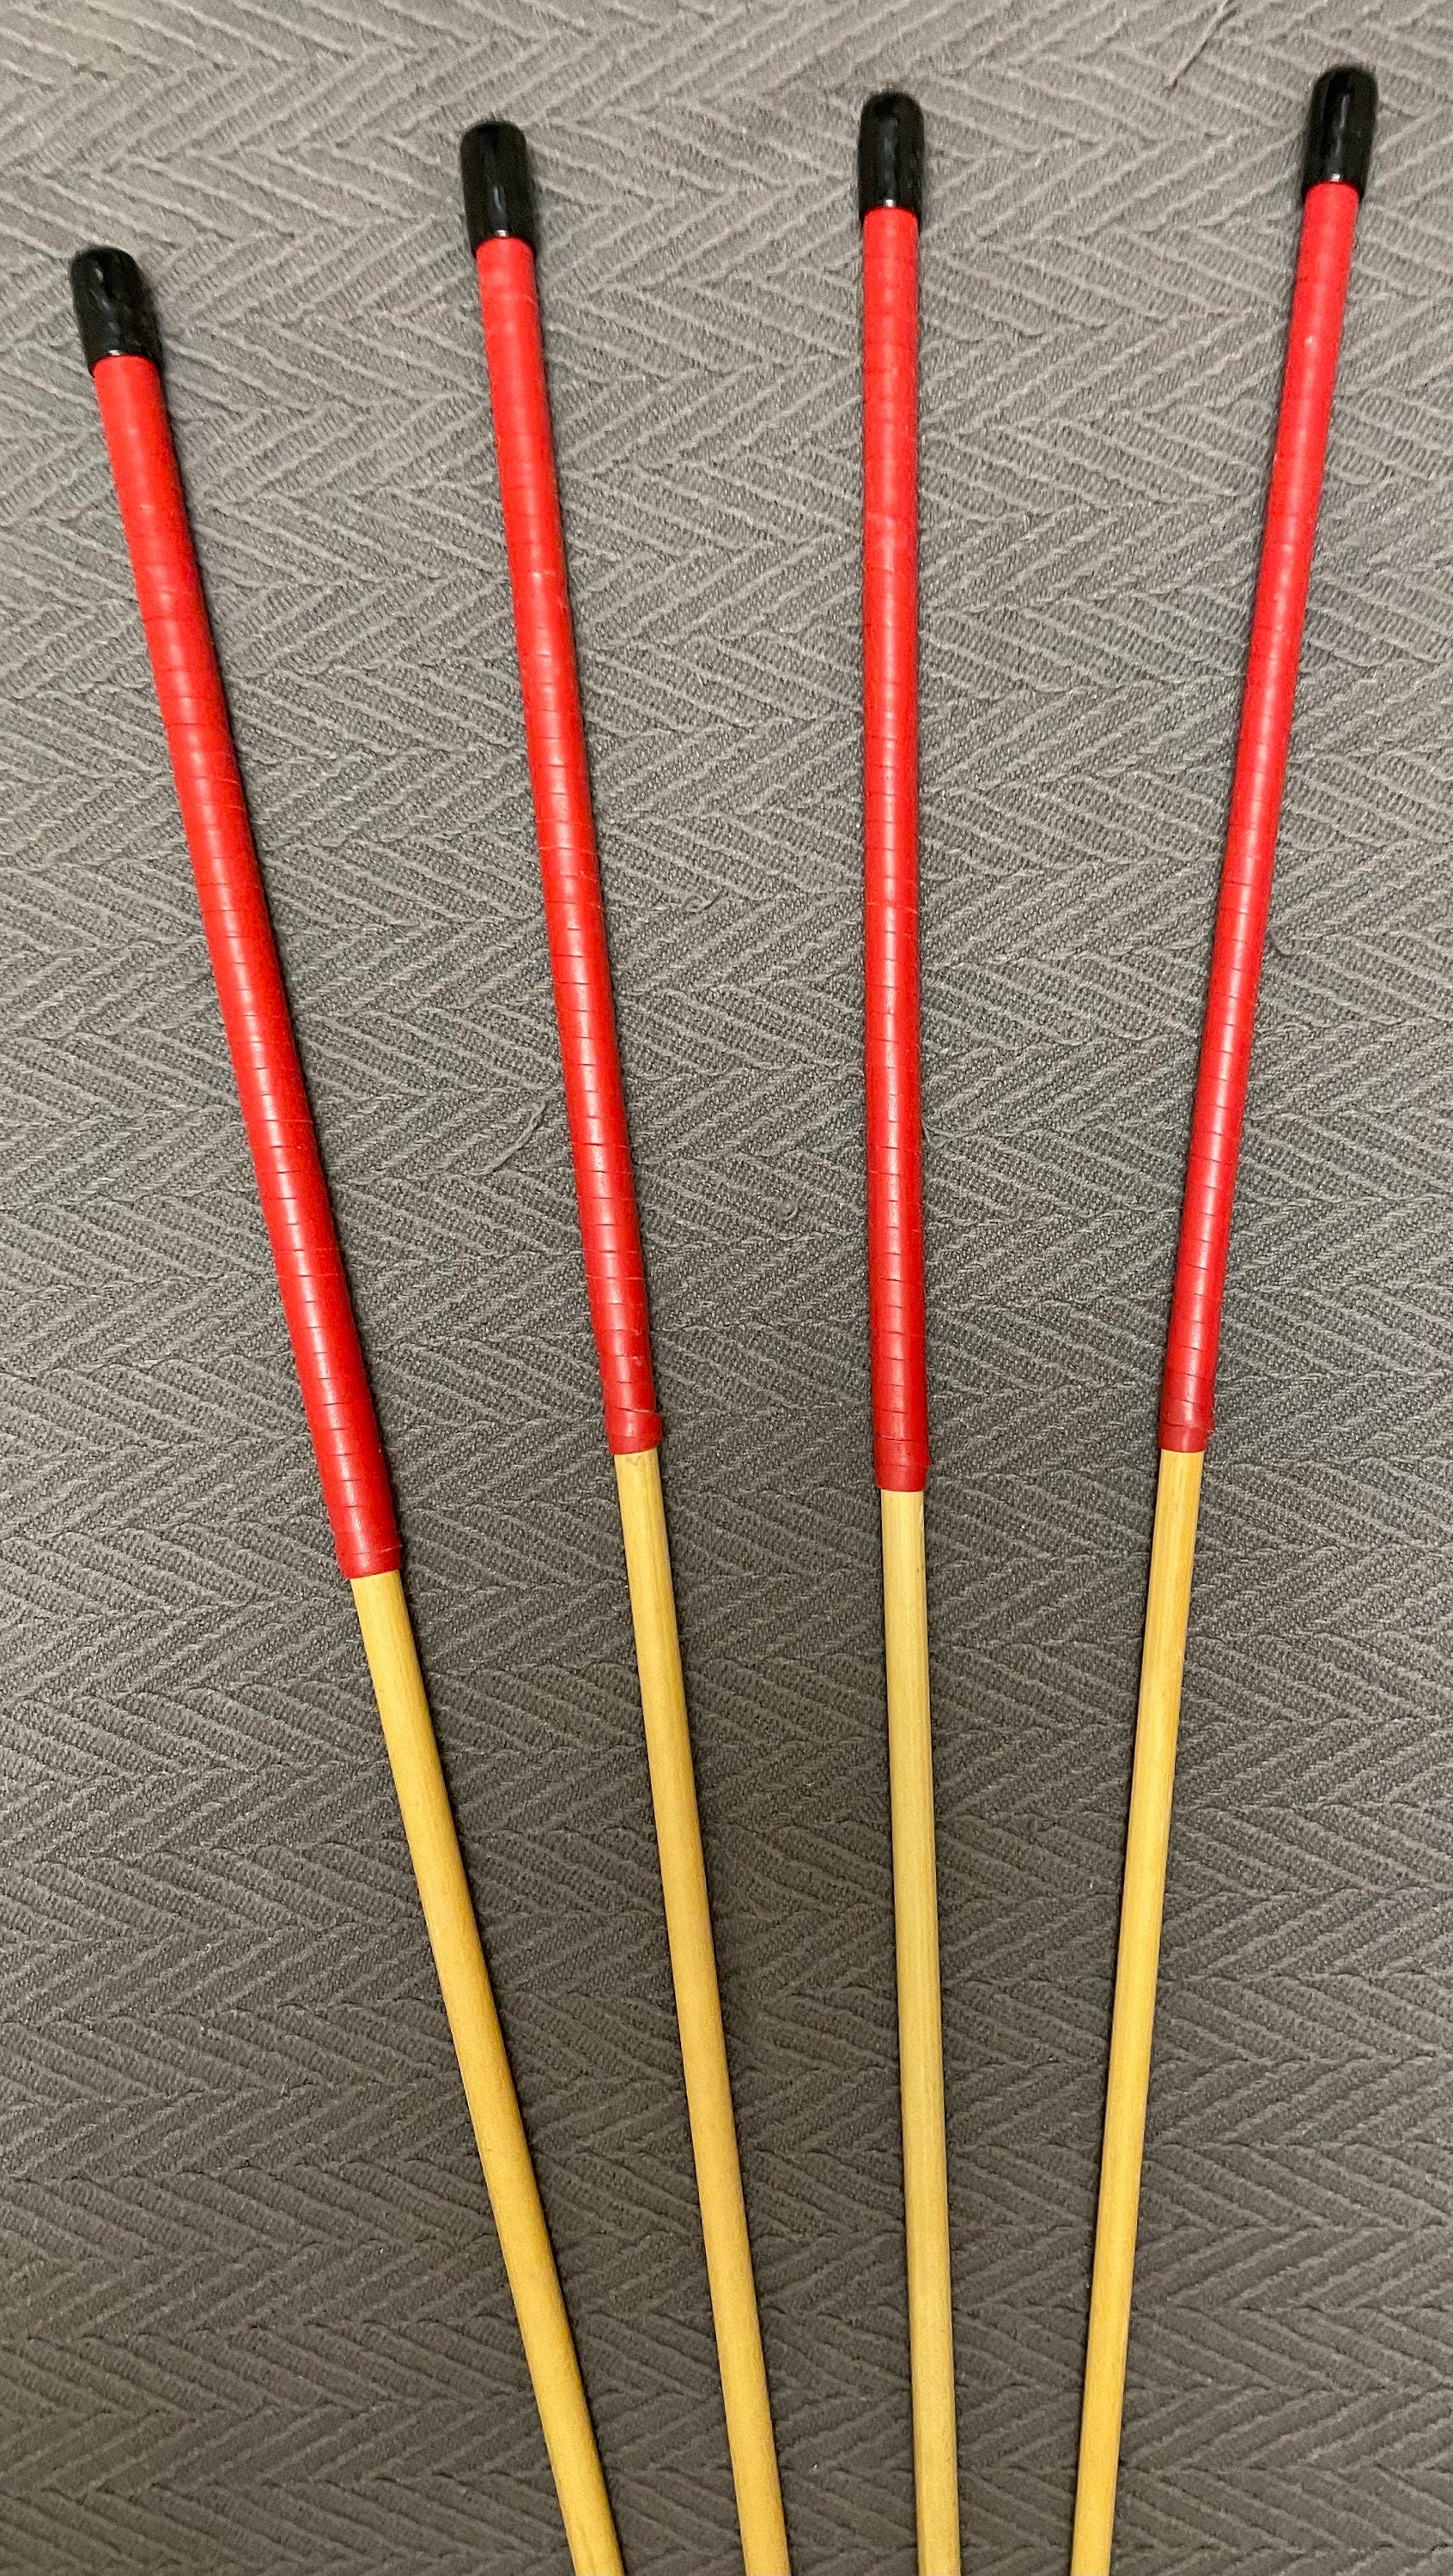 Set of 4 Knotless Dragon Canes / Ultimate Rattan Canes / No Knot Canes - 90 cms Length - Red Kangaroo Leather Handles